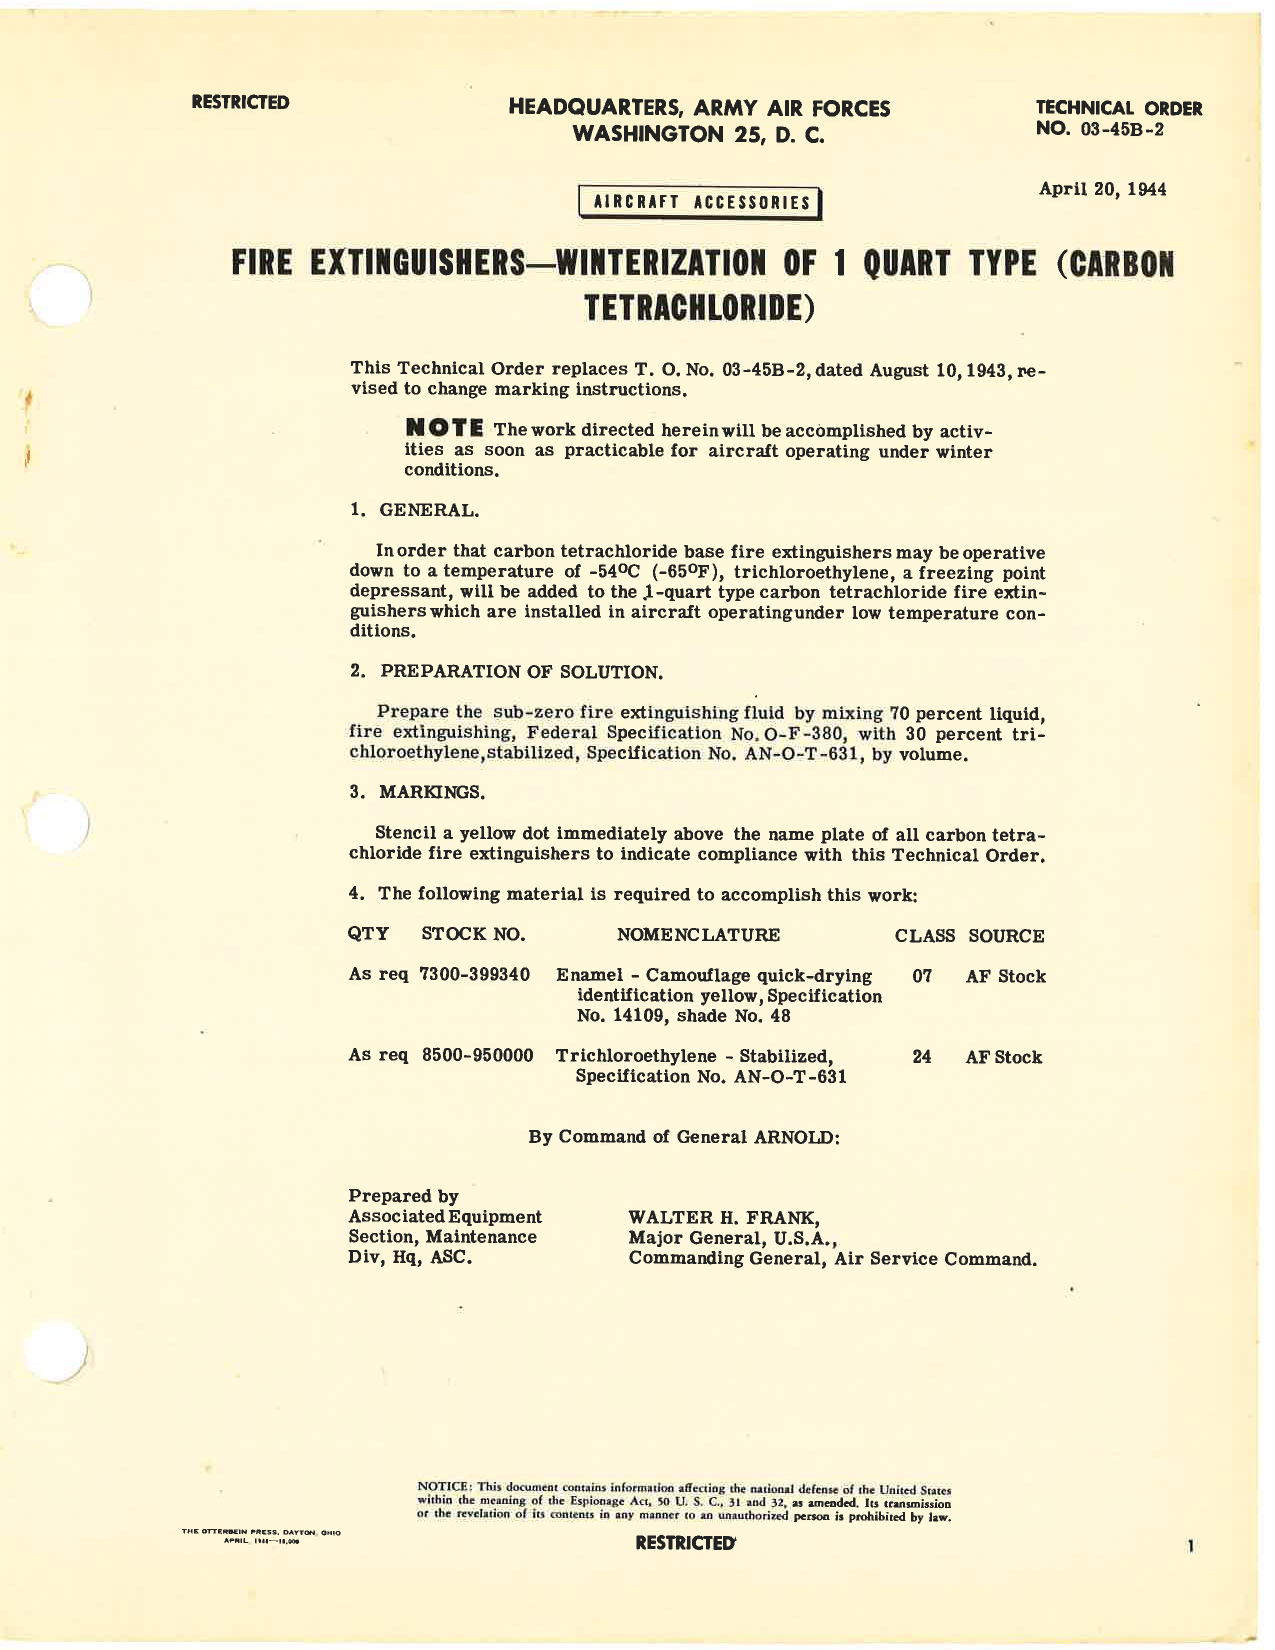 Sample page 1 from AirCorps Library document: Winterization of 1 Quart Type Fire Extinguishers (Carbon Tetrachloride)